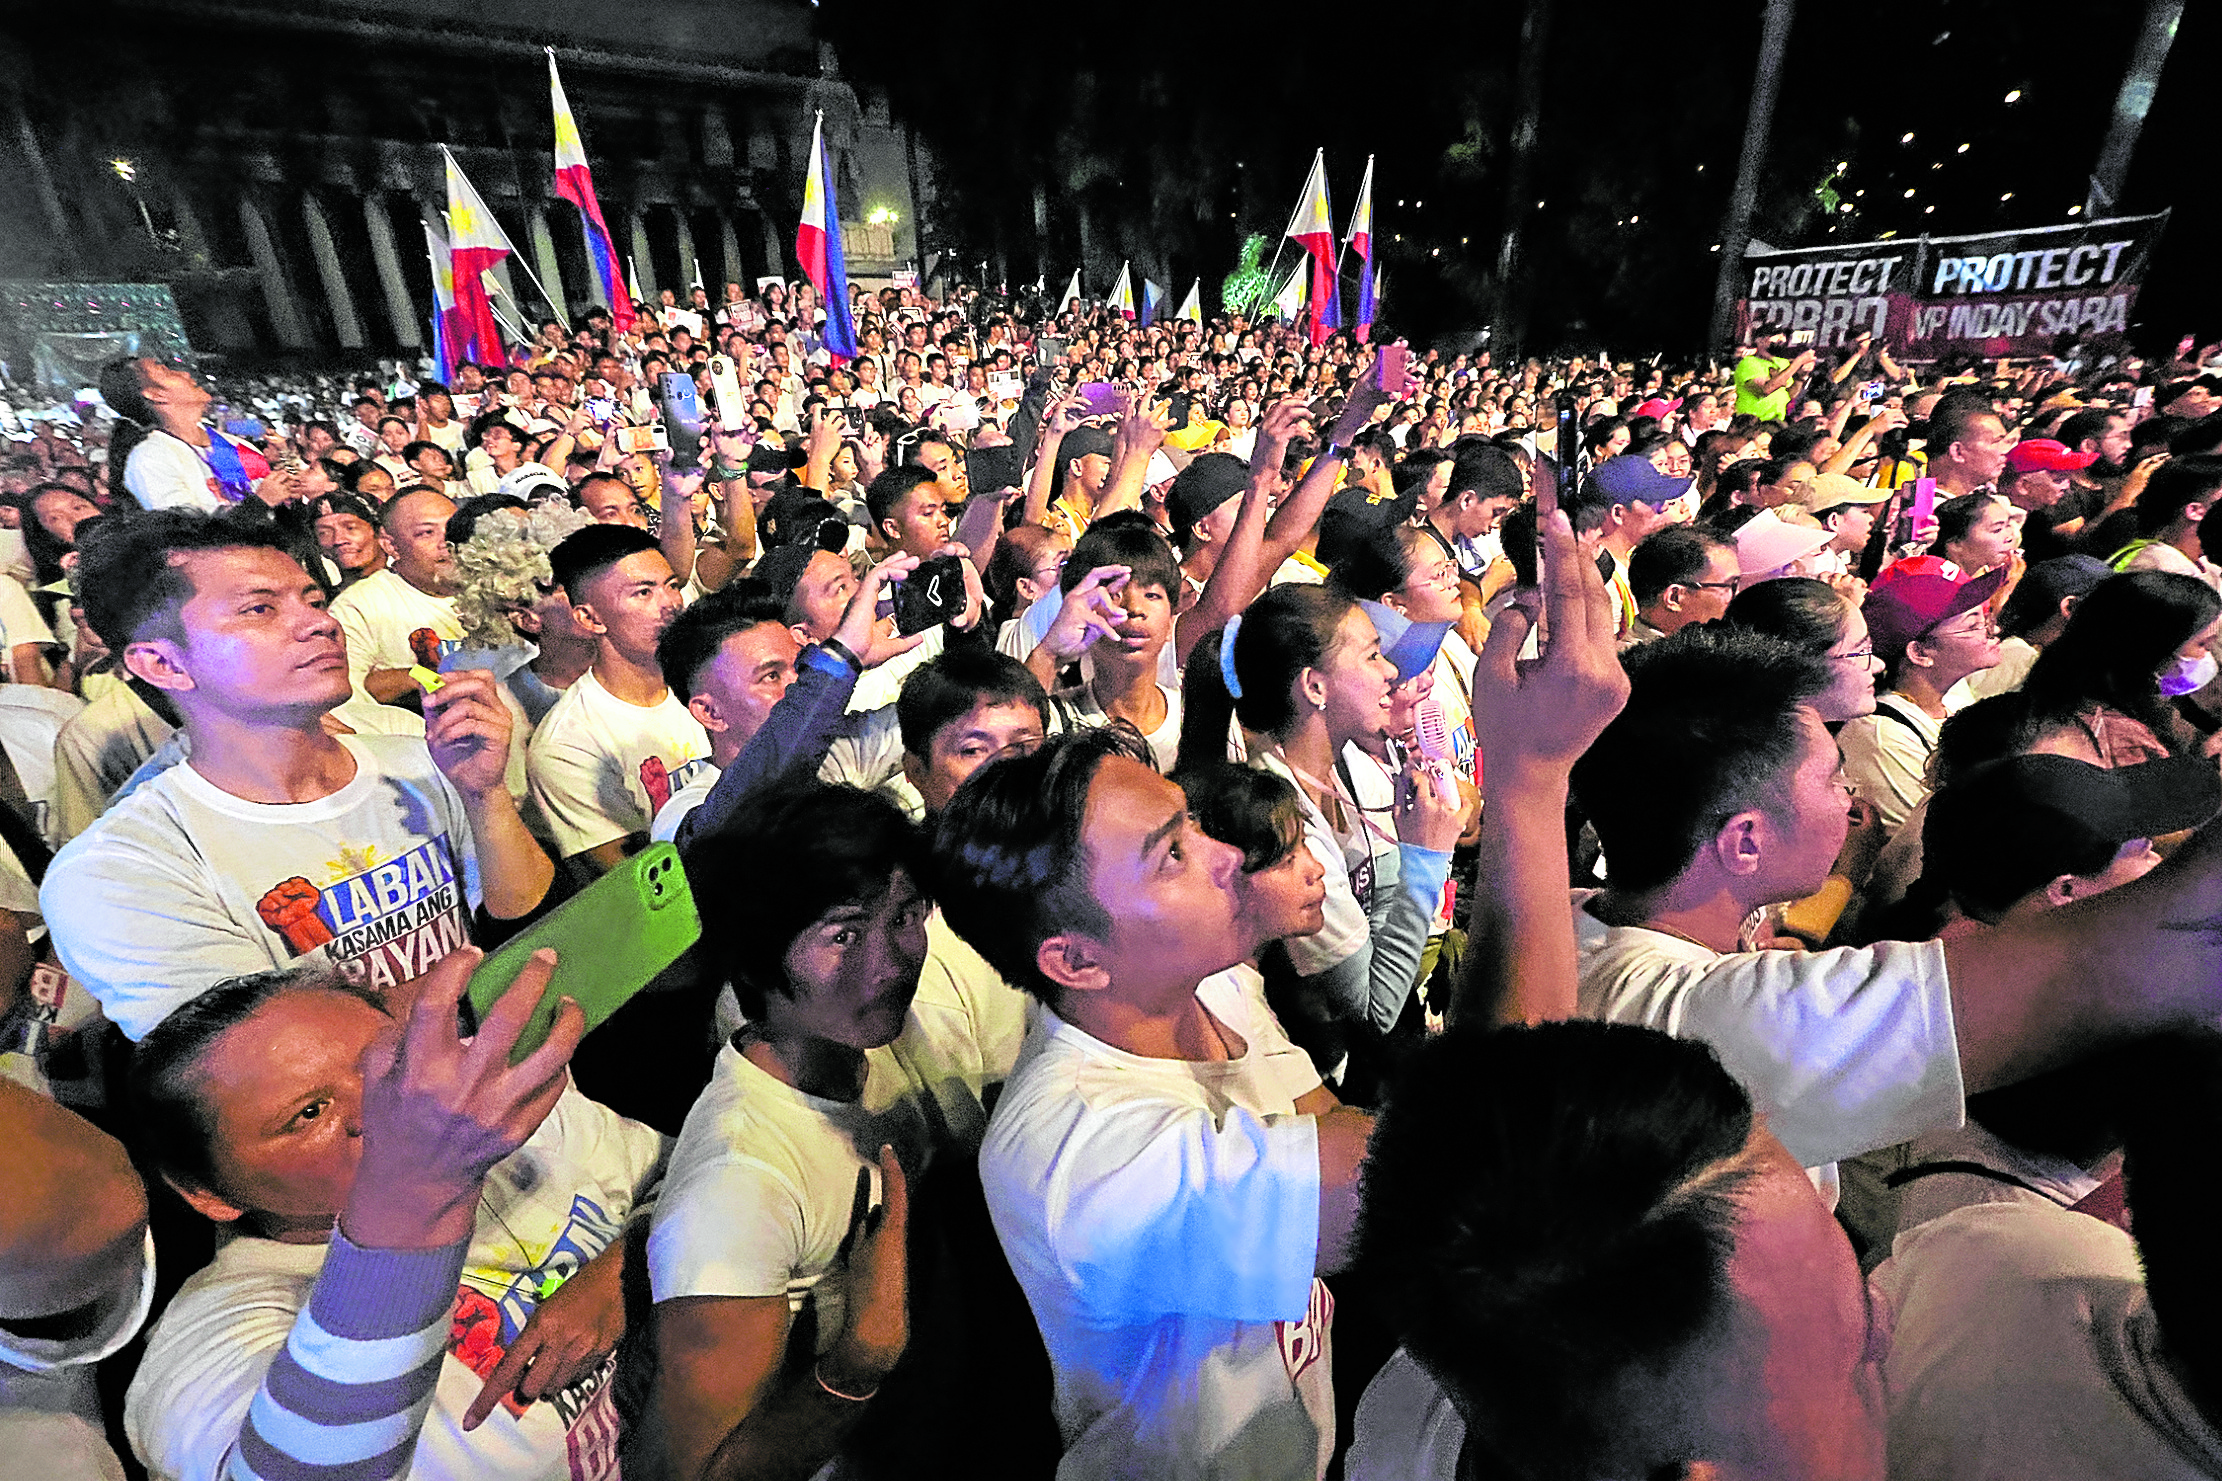 rally held at LiwasangBonifacio by supporters of embattled televangelist Apollo Quiboloy